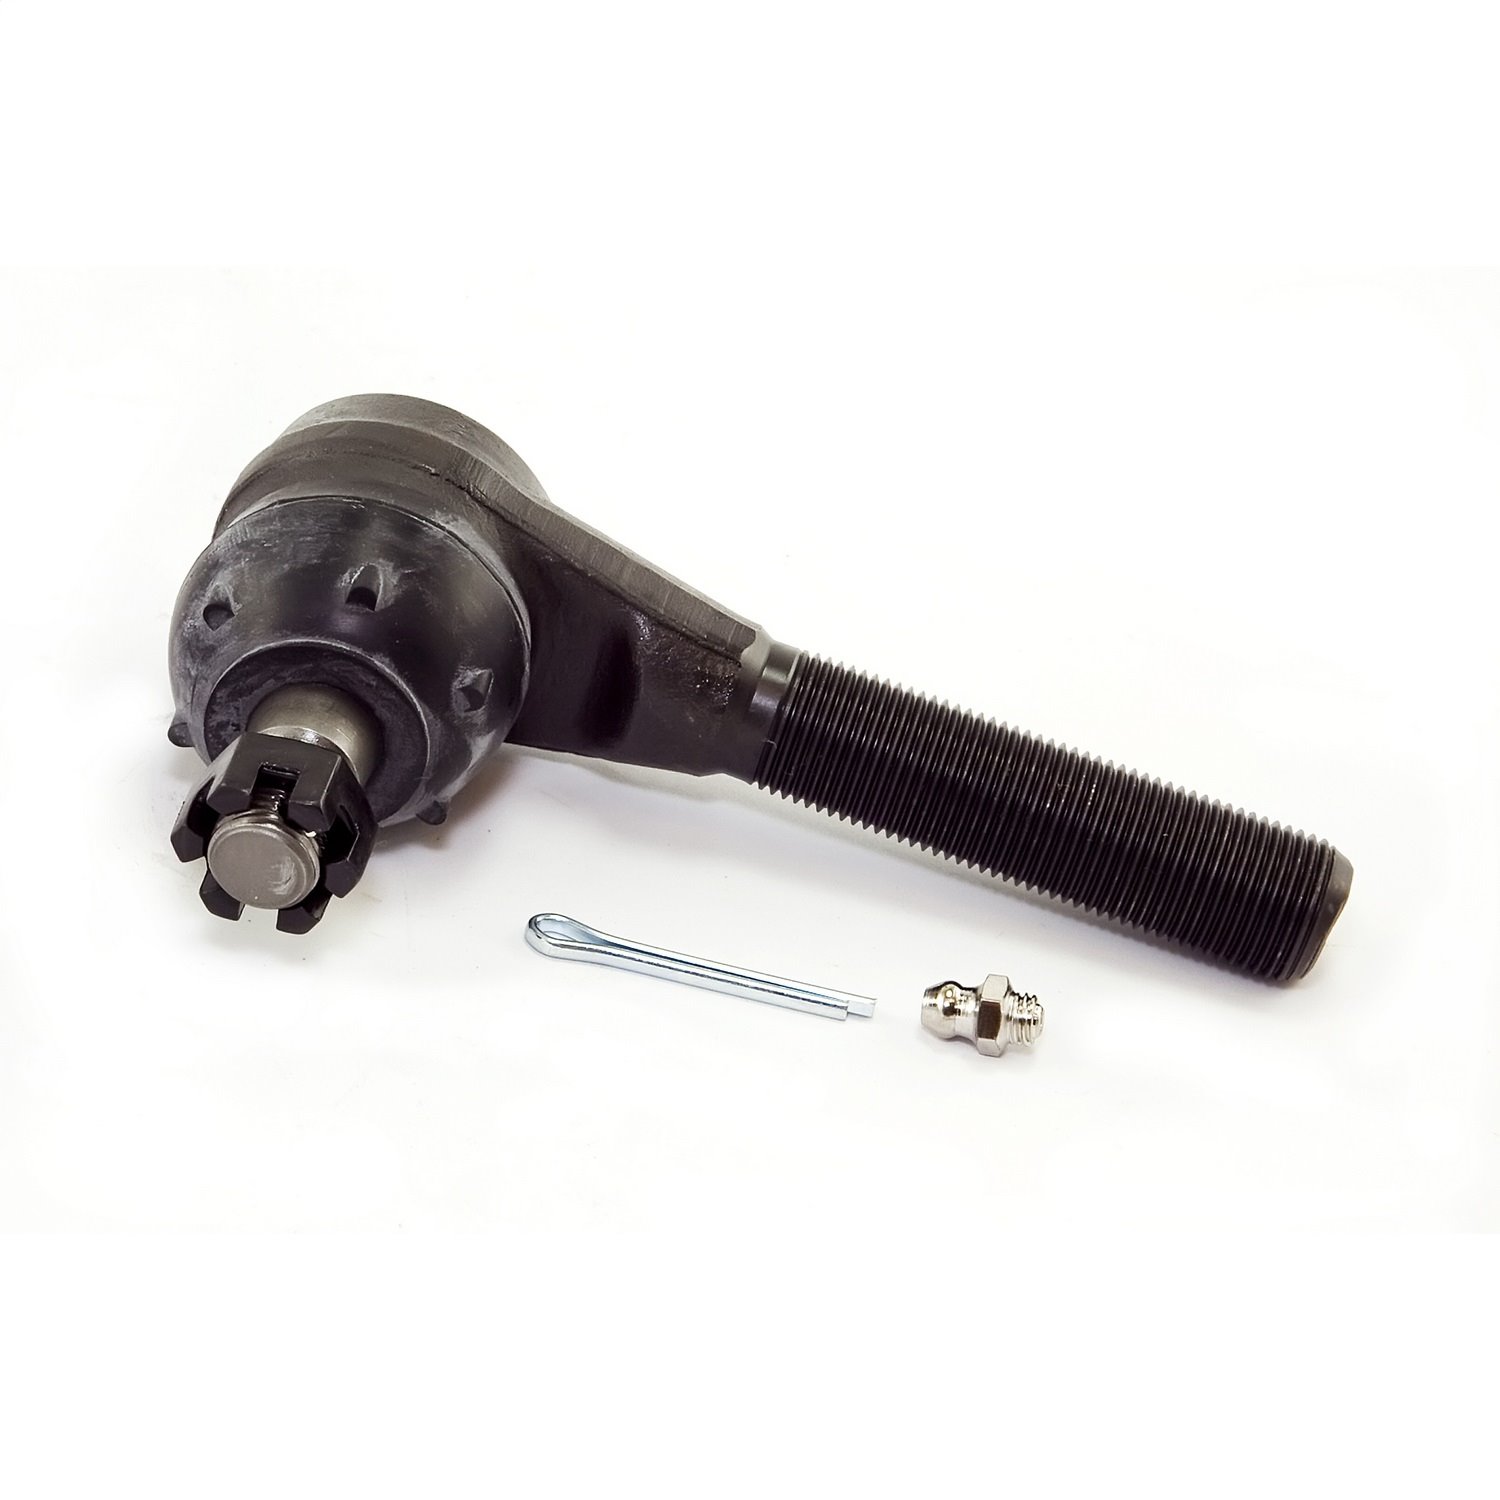 Stock replacement tie rod end from Omix-ADA, Fits